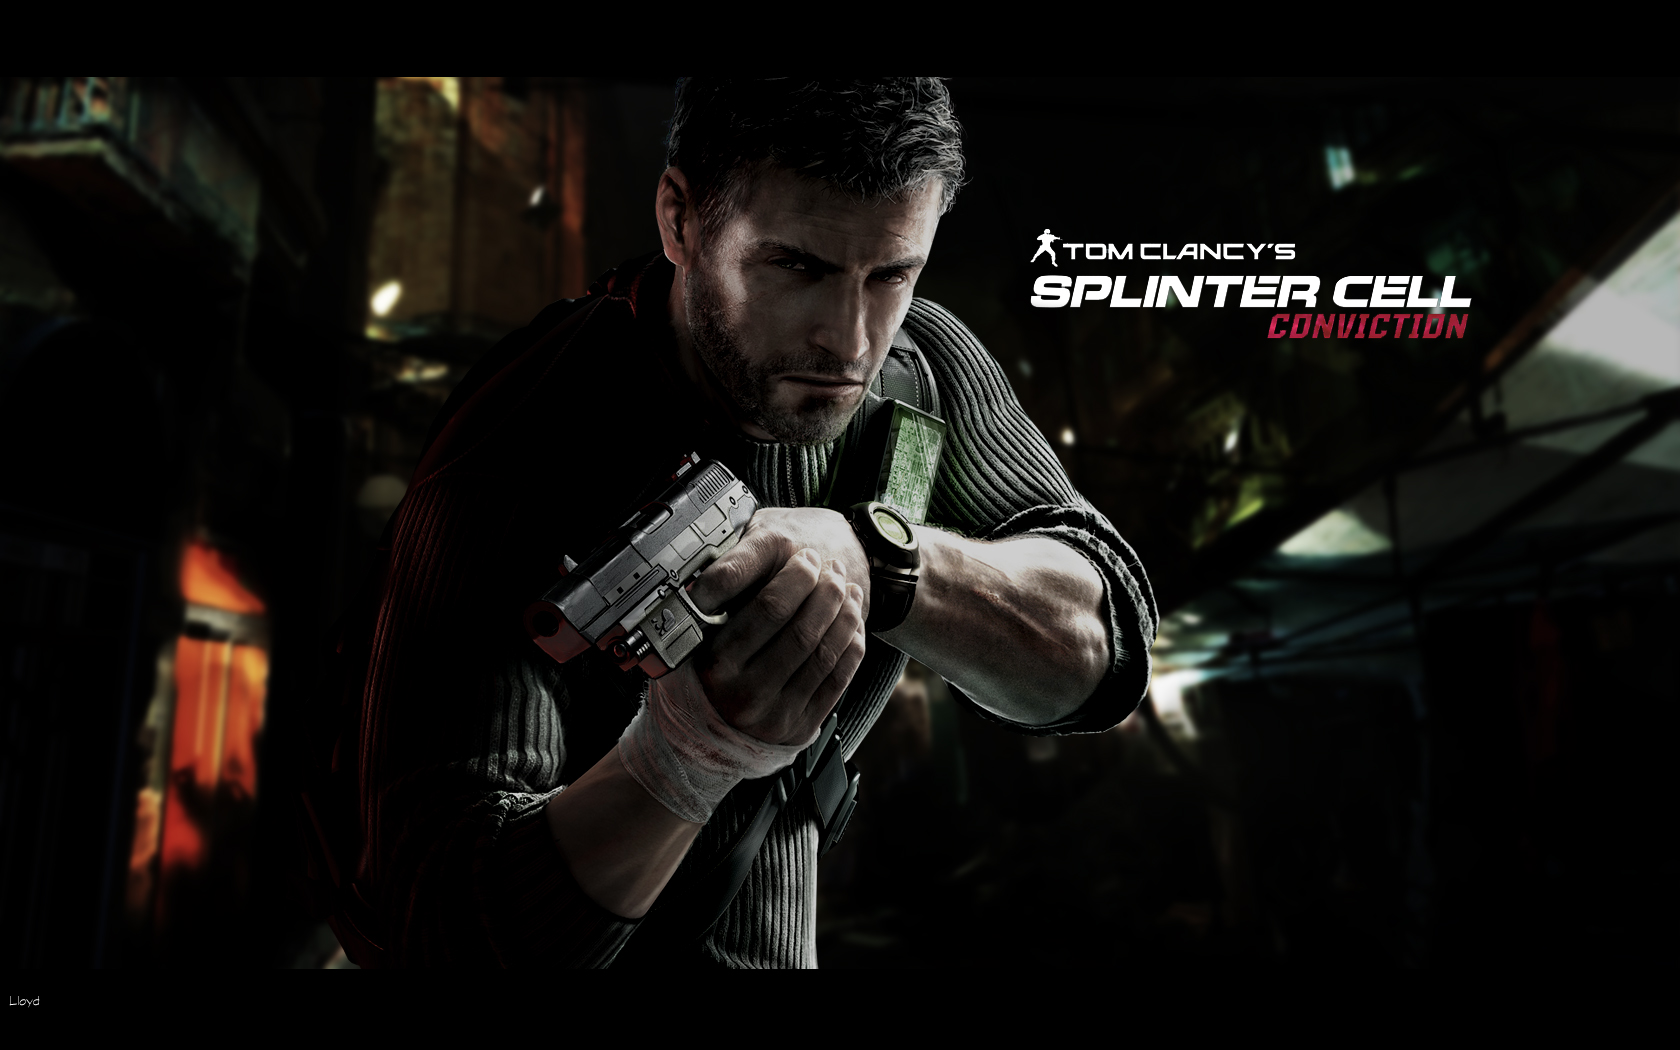 download splinter cell 2010 for free